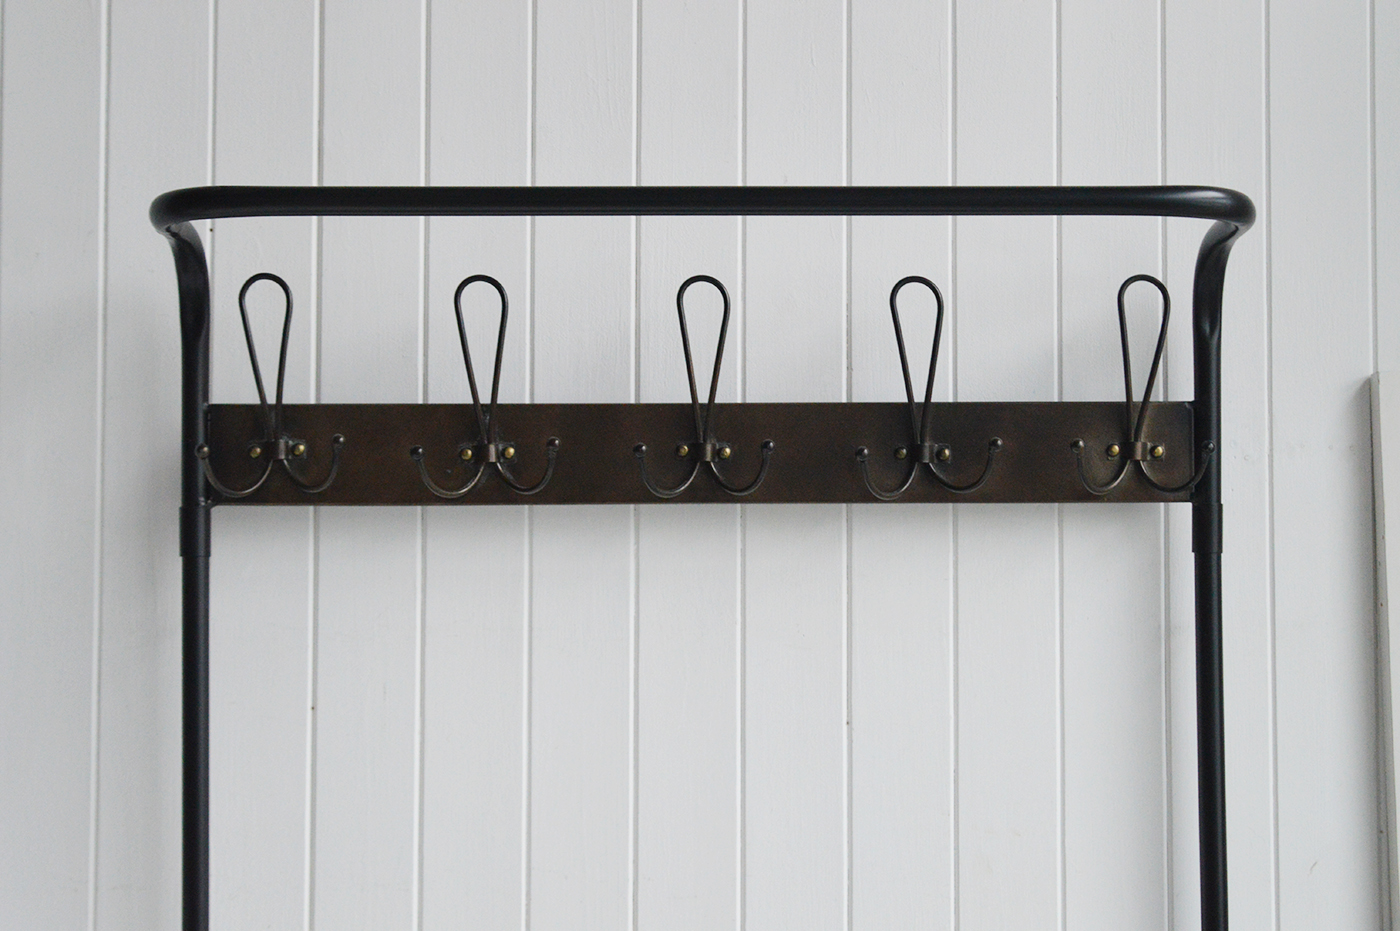 Windsor Hallway Stand - Bench Seat, shelf and Coat Rack for complete Hall Entry Way in antiqued black metal for modern farmhouse, coastal and country New England Interiors . Photo shows the top coat rack hooks frontal